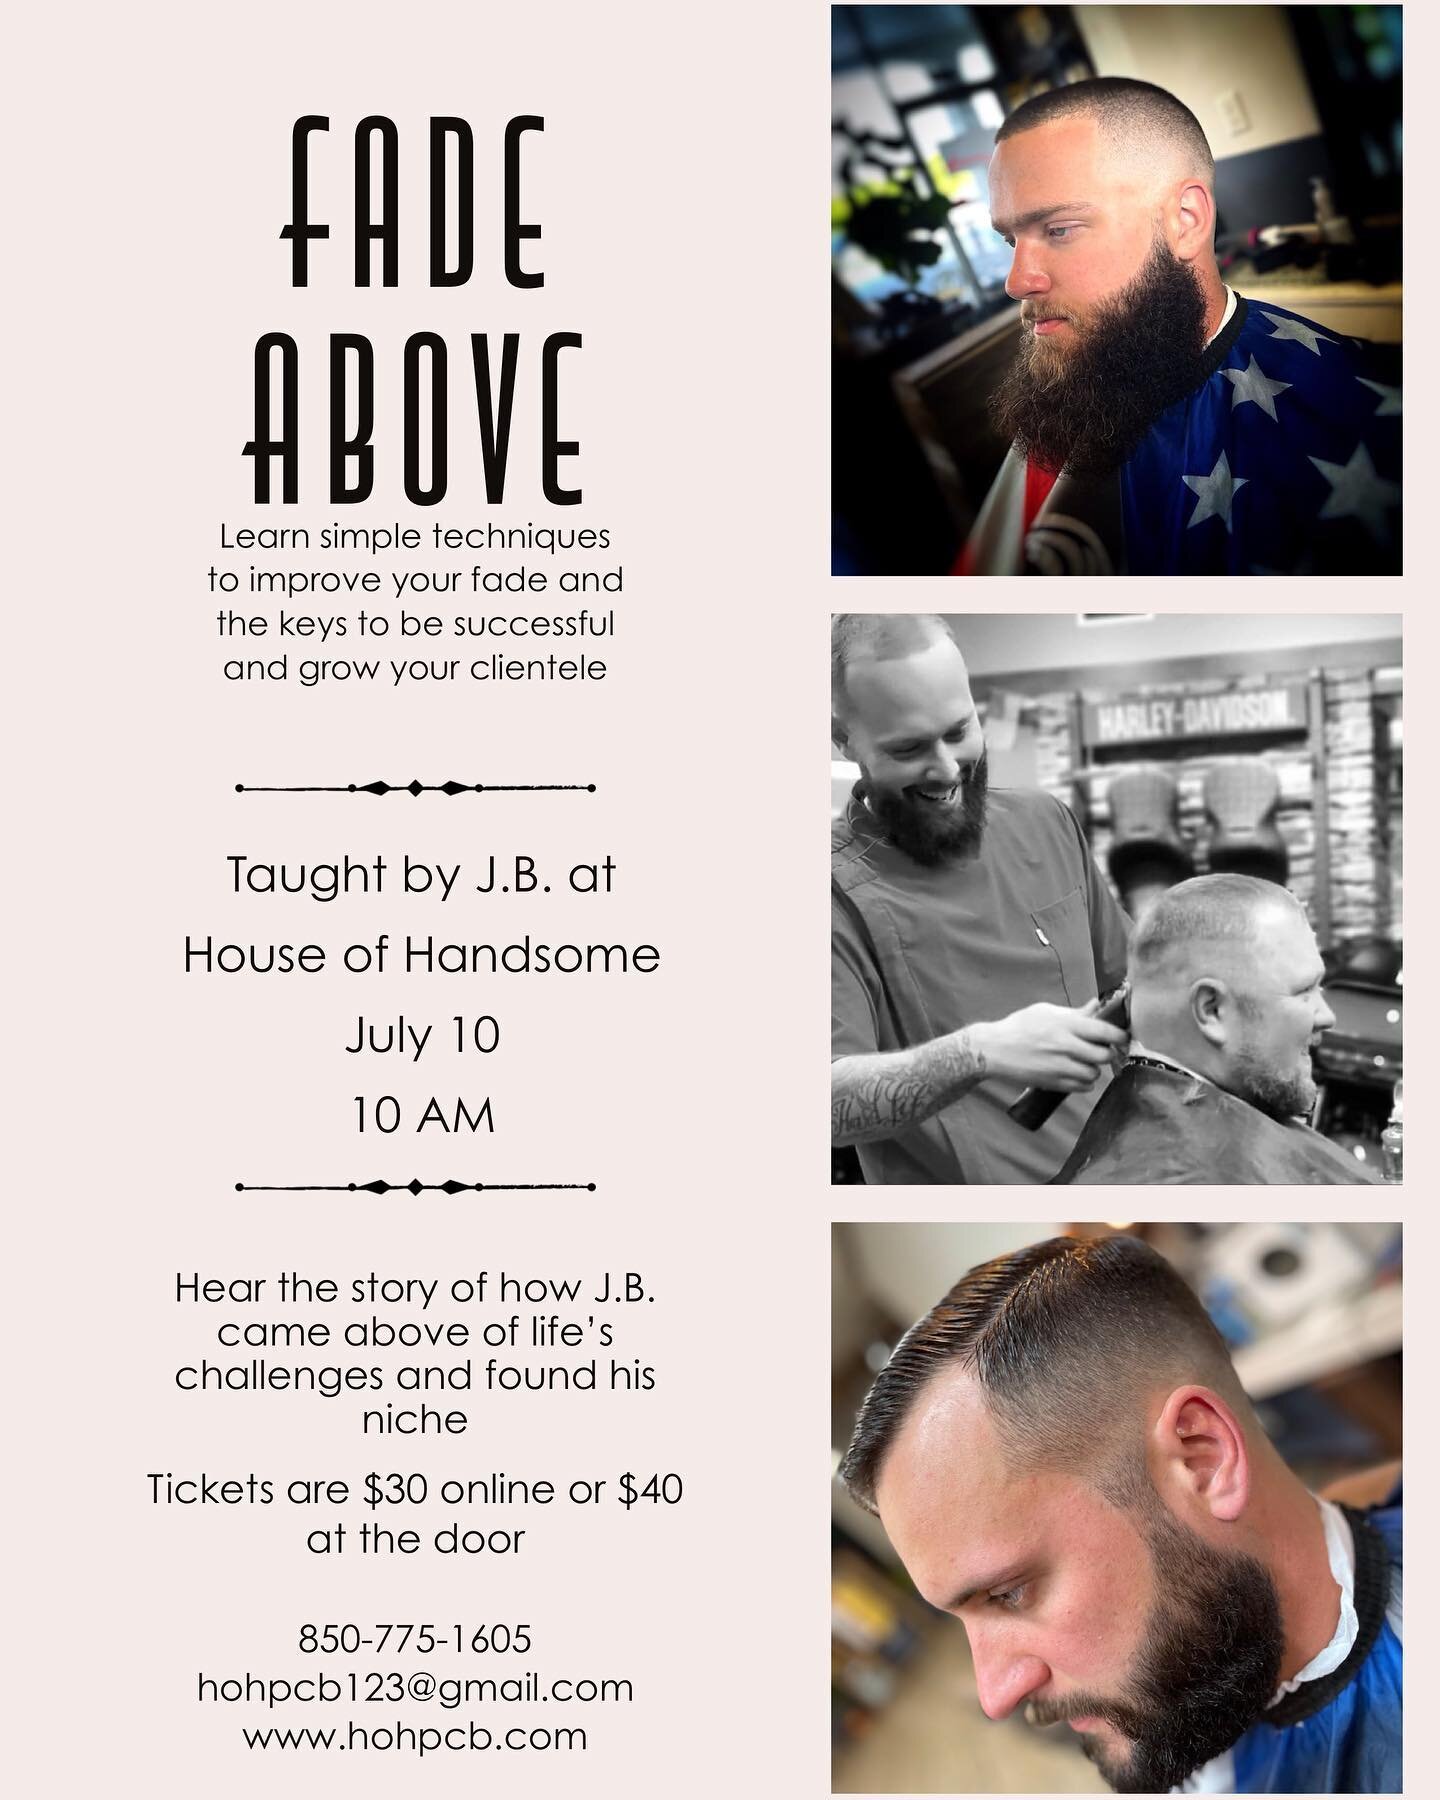 House of Handsome is pleased to announce a new workshop July 10, Fade Above. Whether you are a seasoned barber or cosmetologist, just starting to cut your teeth in the industry, or wanting to find out if this is the career choice for you this one day